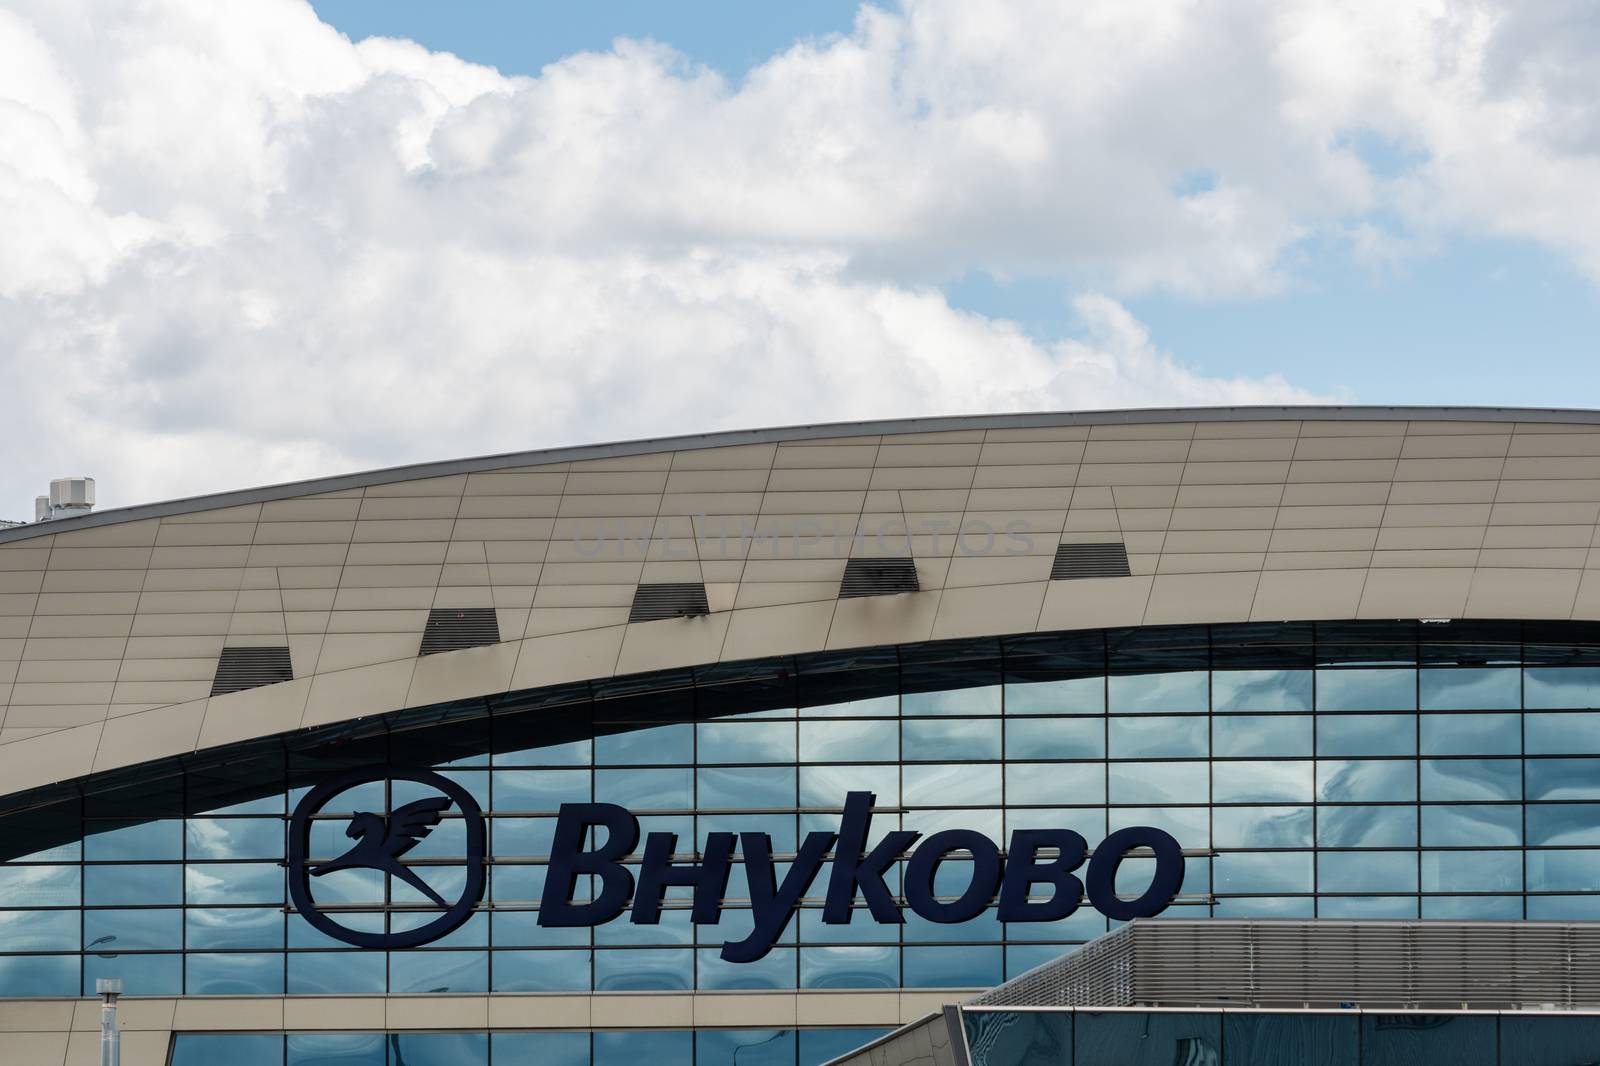 July 2, 2019 Moscow, Russia. Sign on the facade of the terminal of Vnukovo airport in clear sunny weather